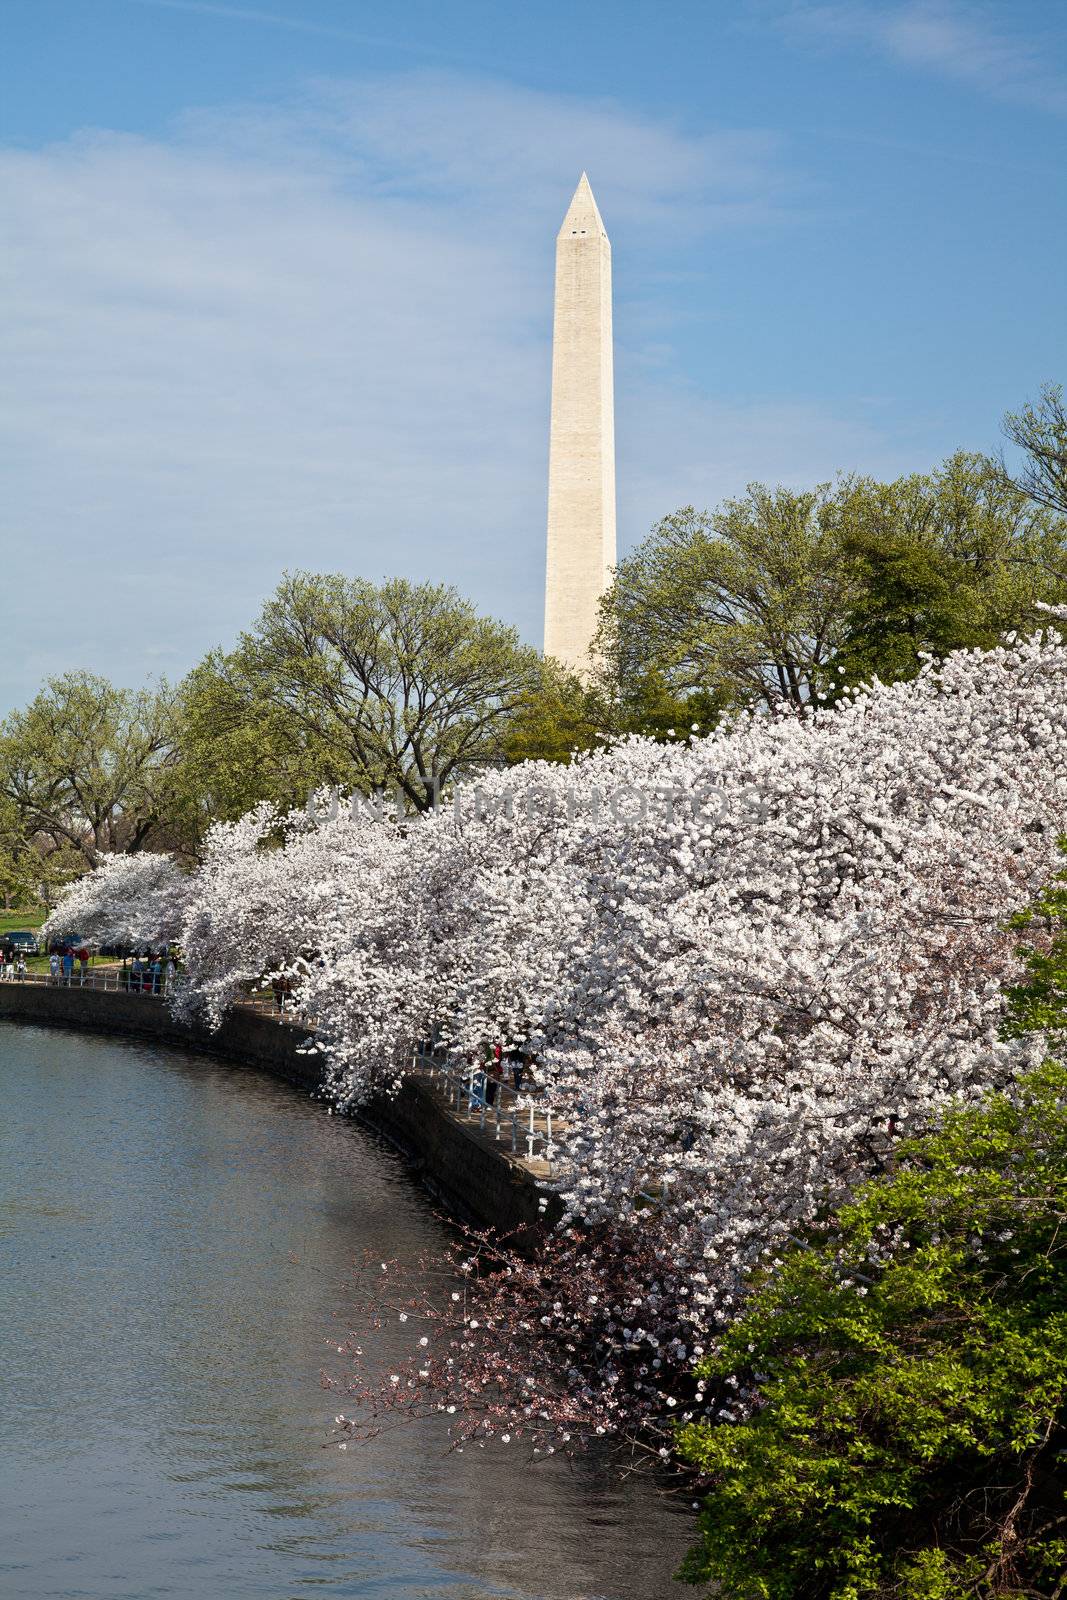 Cherry blossoms around the Tidal Basin in Washington DC with the Washington Monument